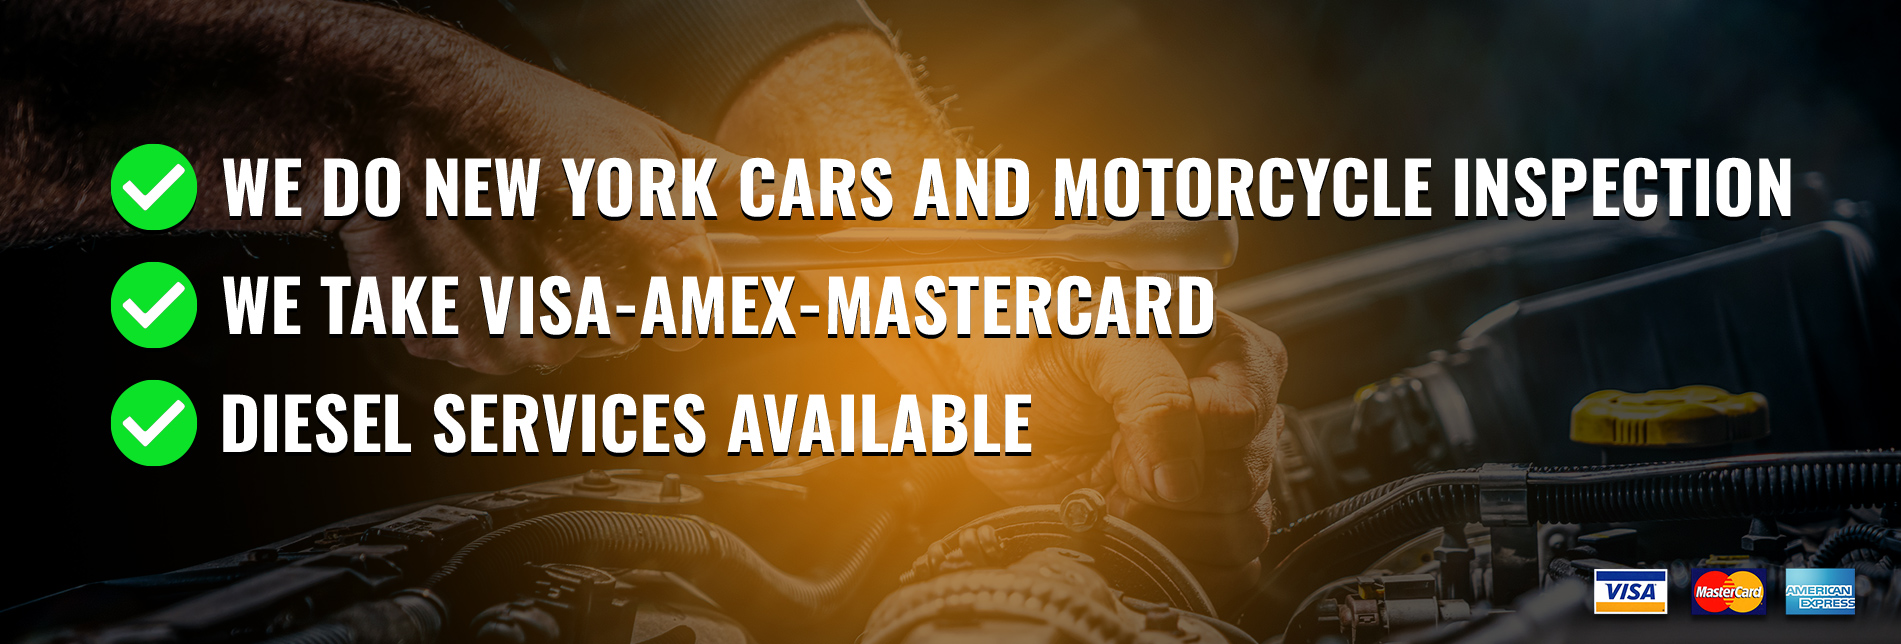 We Do New York Cars and Motorcycle Inspection, We take VISA-AMEX-Mastercard , Diesel Services Available